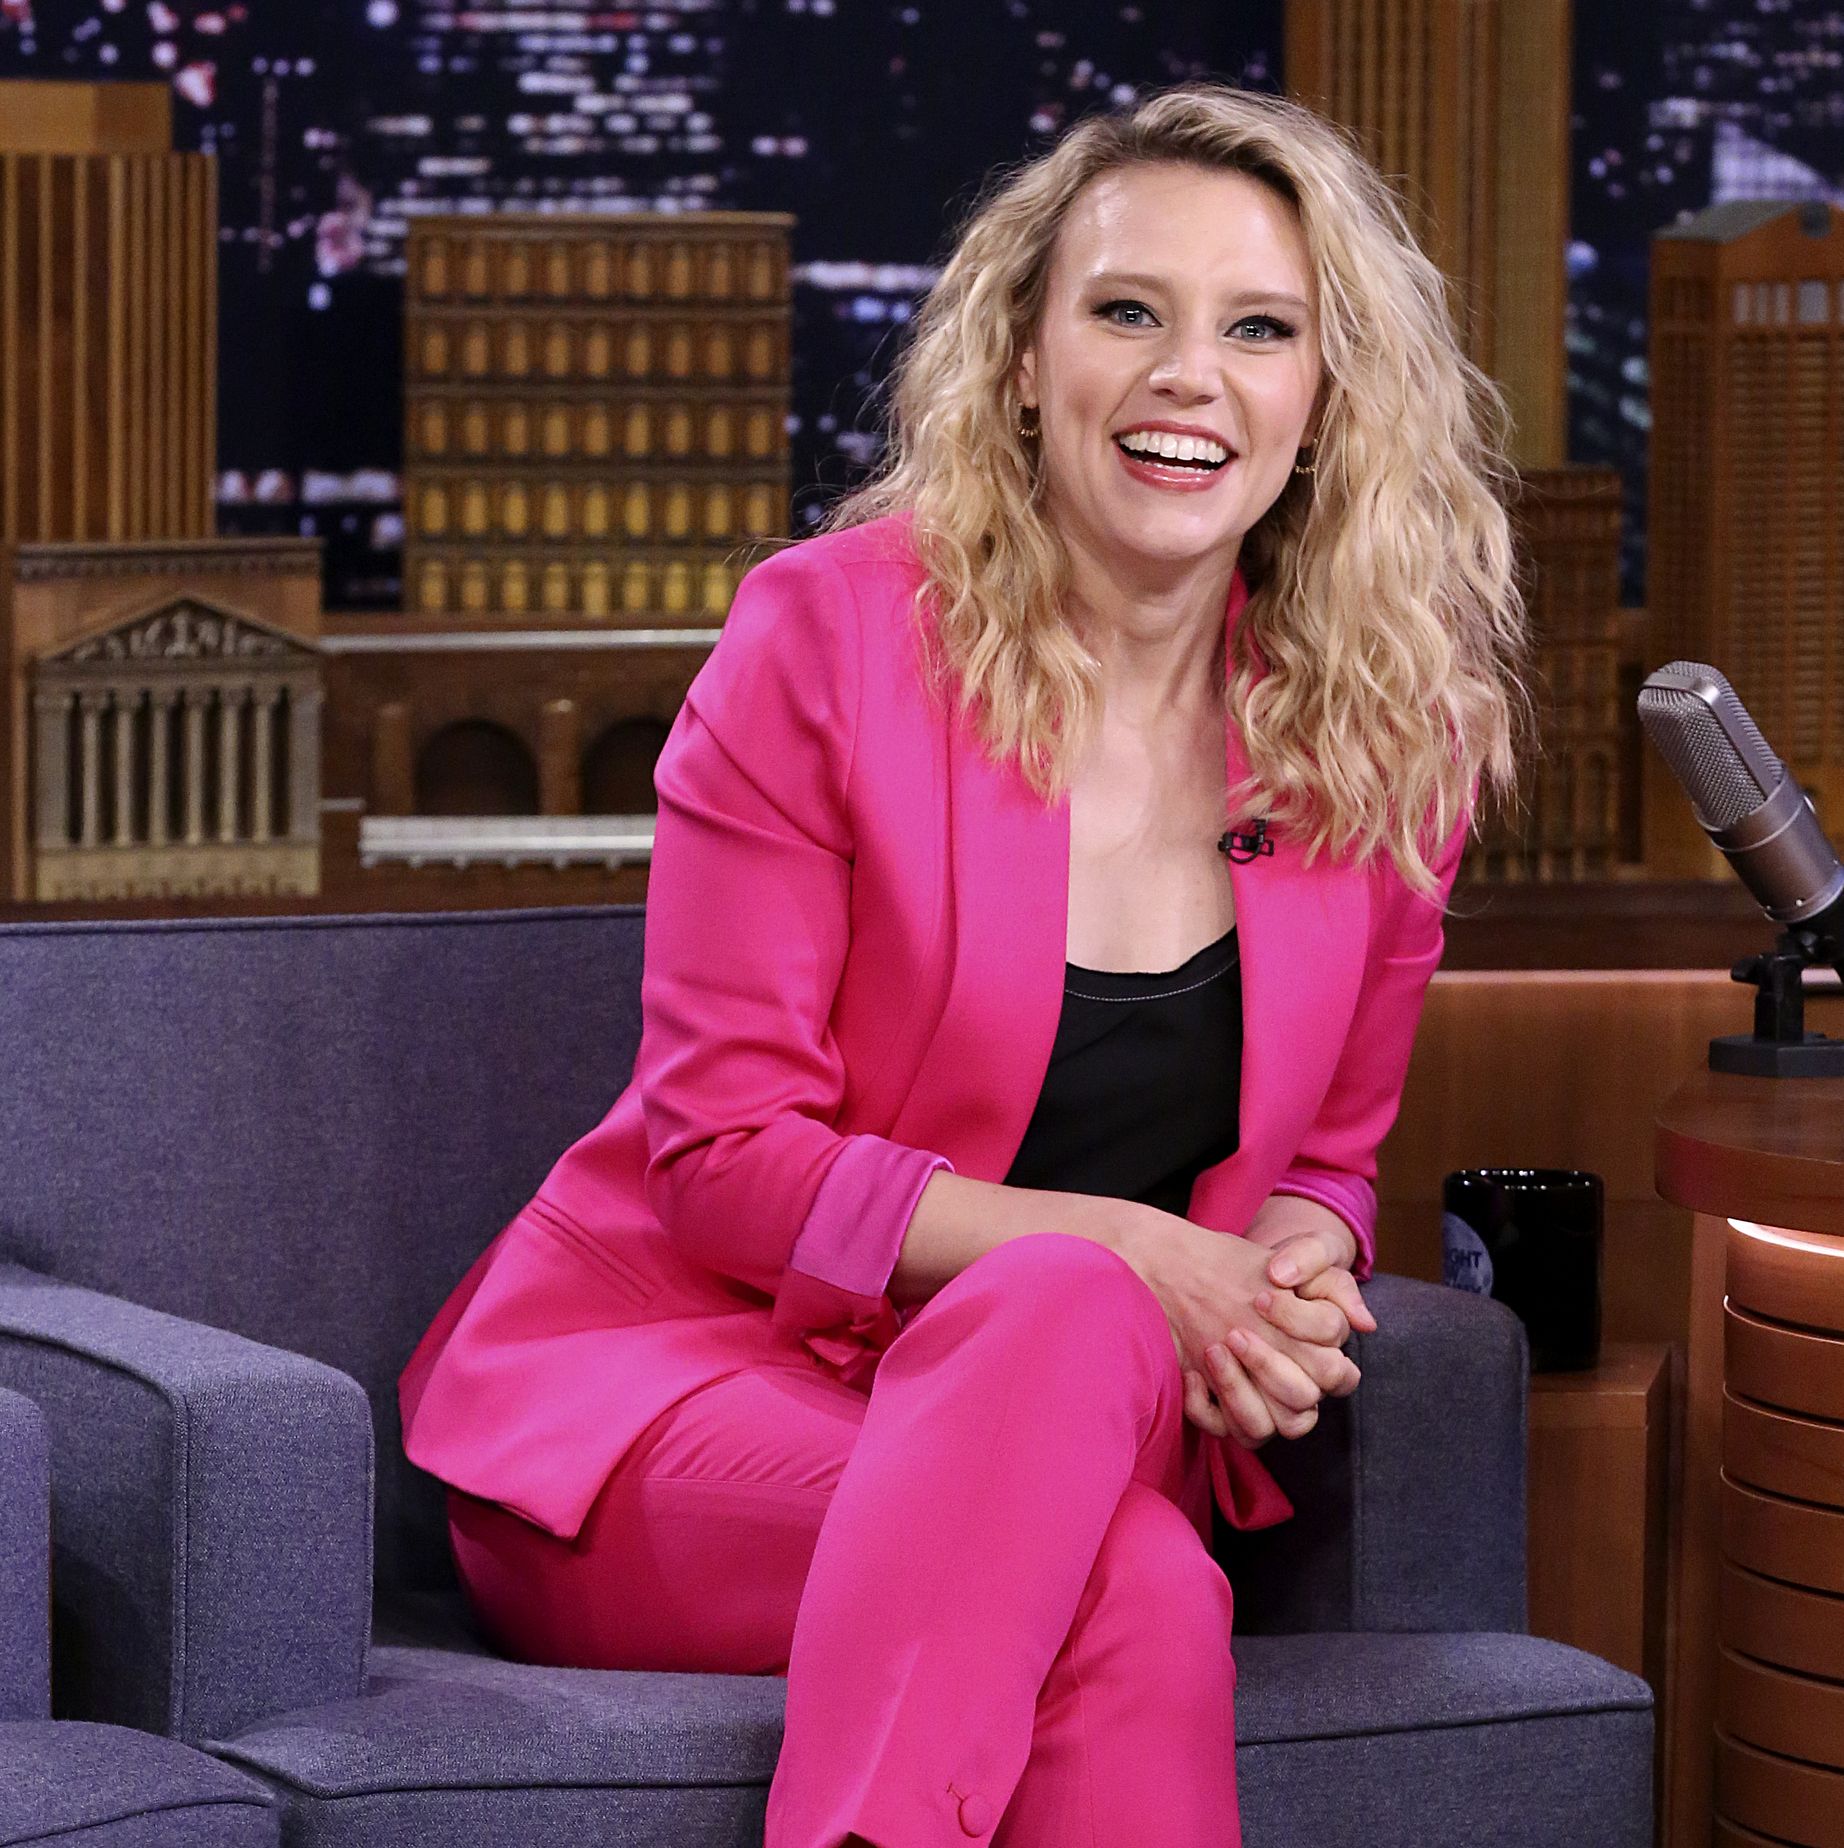 anuj agrawal recommends Has Kate Mckinnon Ever Been Nude